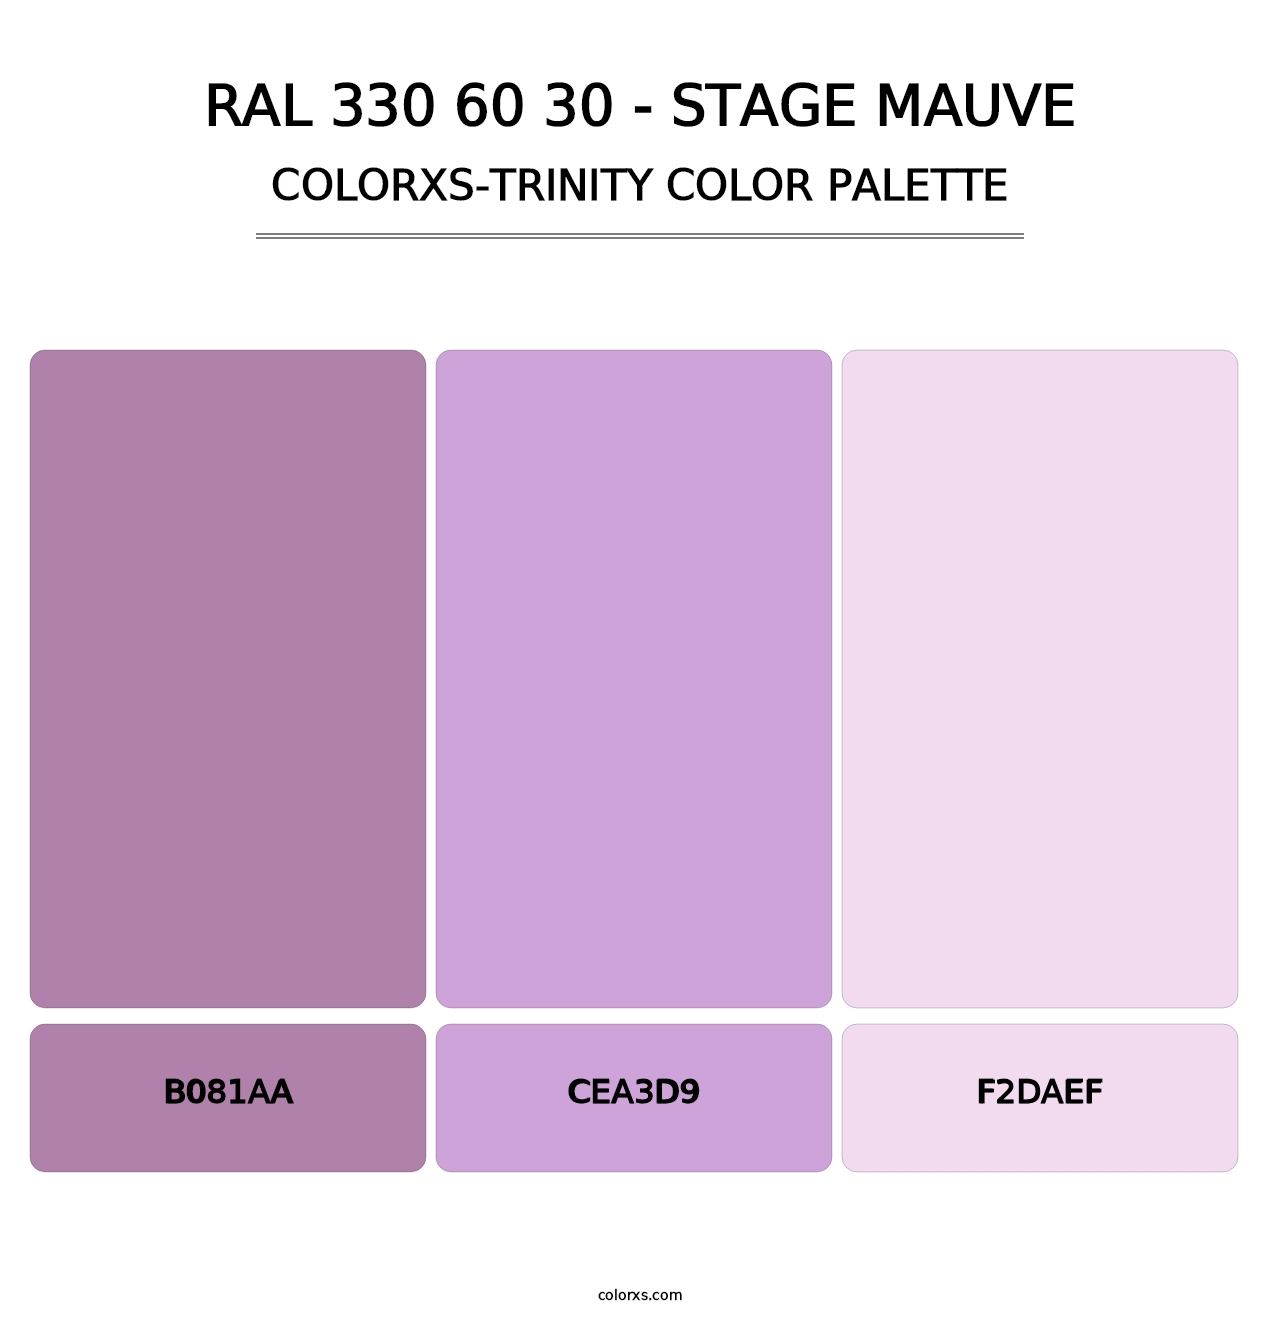 RAL 330 60 30 - Stage Mauve - Colorxs Trinity Palette